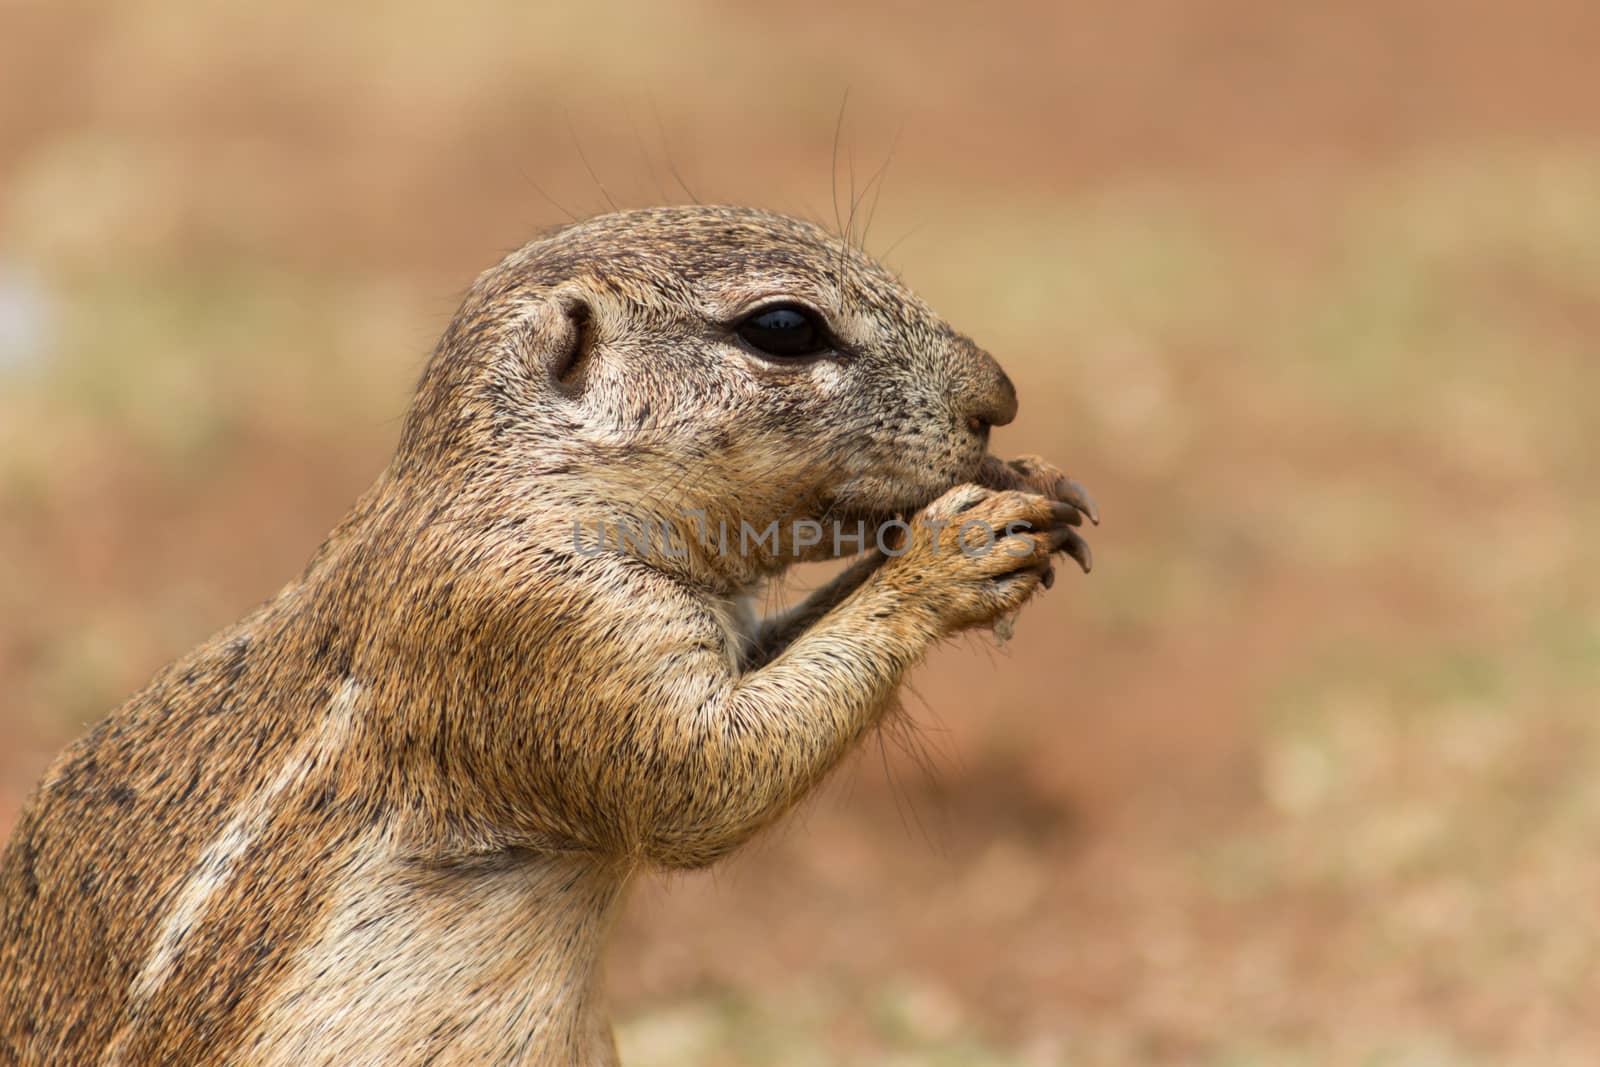 African ground squirrel (Marmotini) closeup portrait eating a nu by RiaanAlbrecht